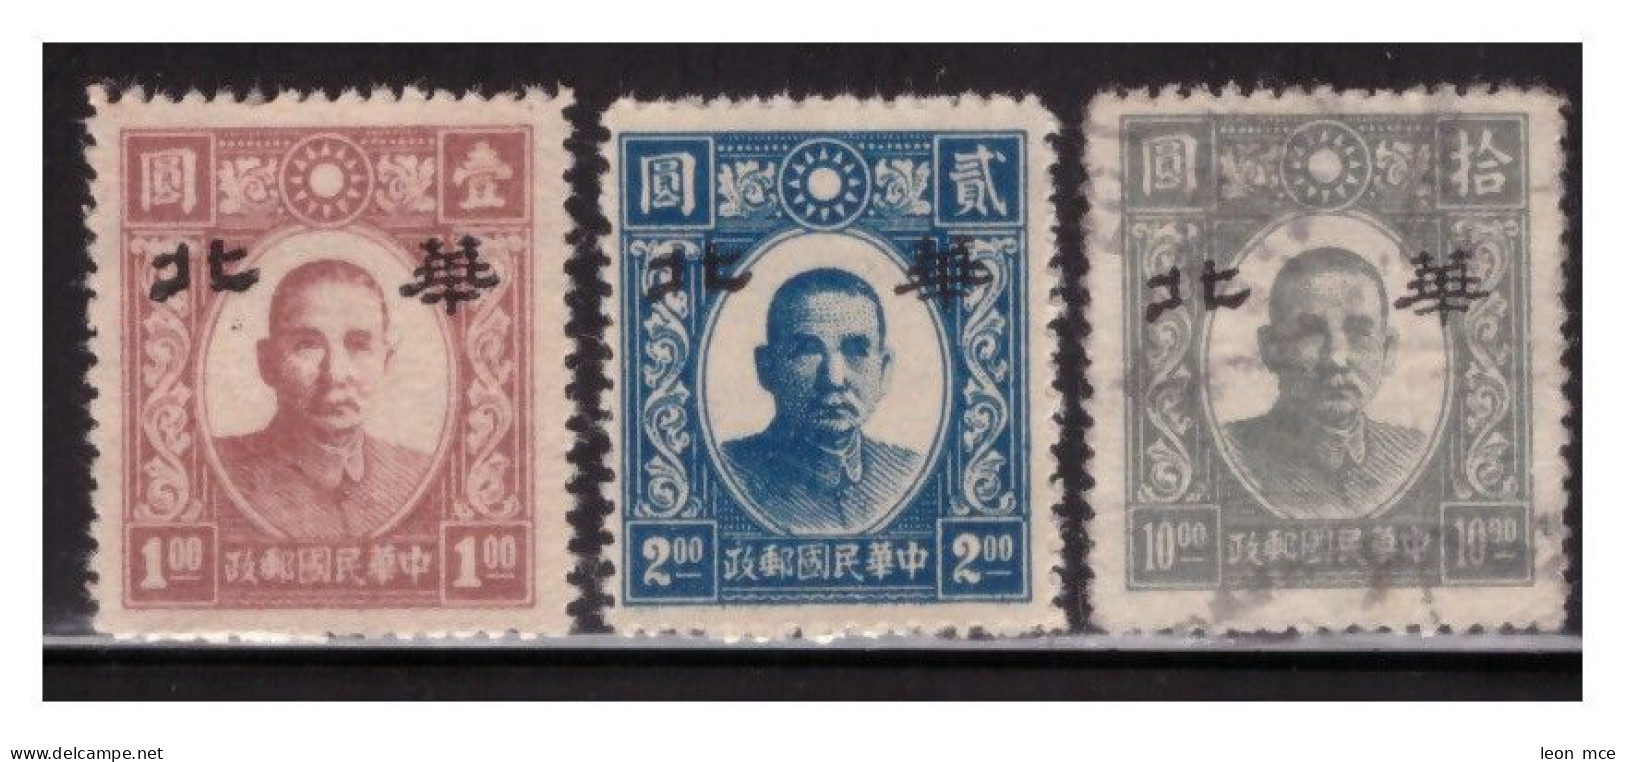 1945 CHINA NORTH "HWA PEI" Dr. SUN YAT-SEN, WITHOUT Overprint Are Proofs STAMPS (3) - 1941-45 Northern China